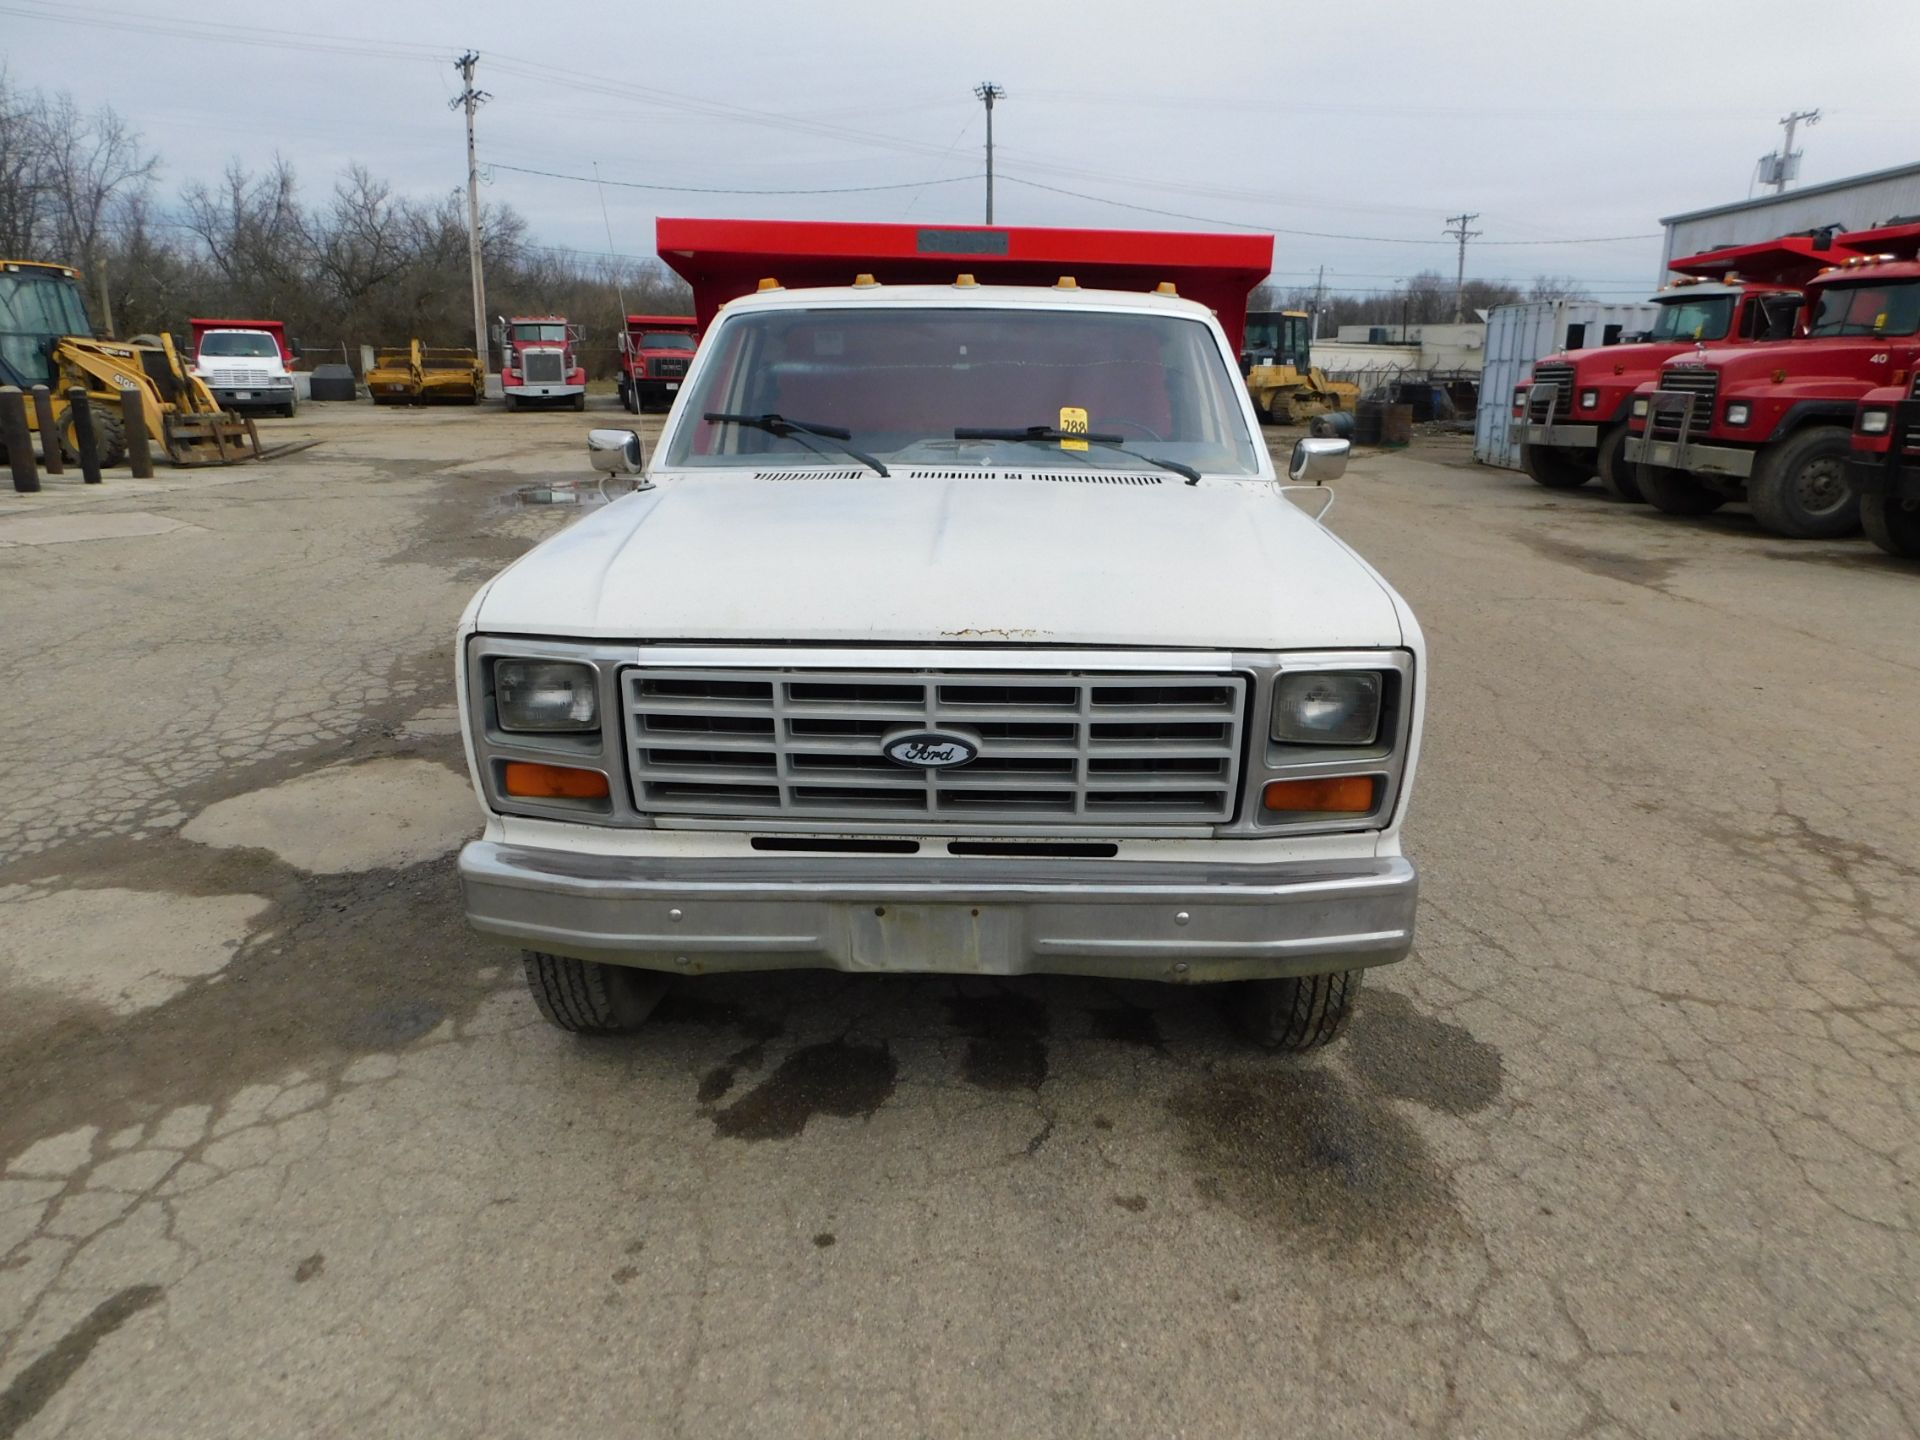 1986 Ford F-350 Single Axle Dump, Gas, 4-Speed Manual Transmission, PTO, 10' Steel Dump Bed, 81, - Image 2 of 18